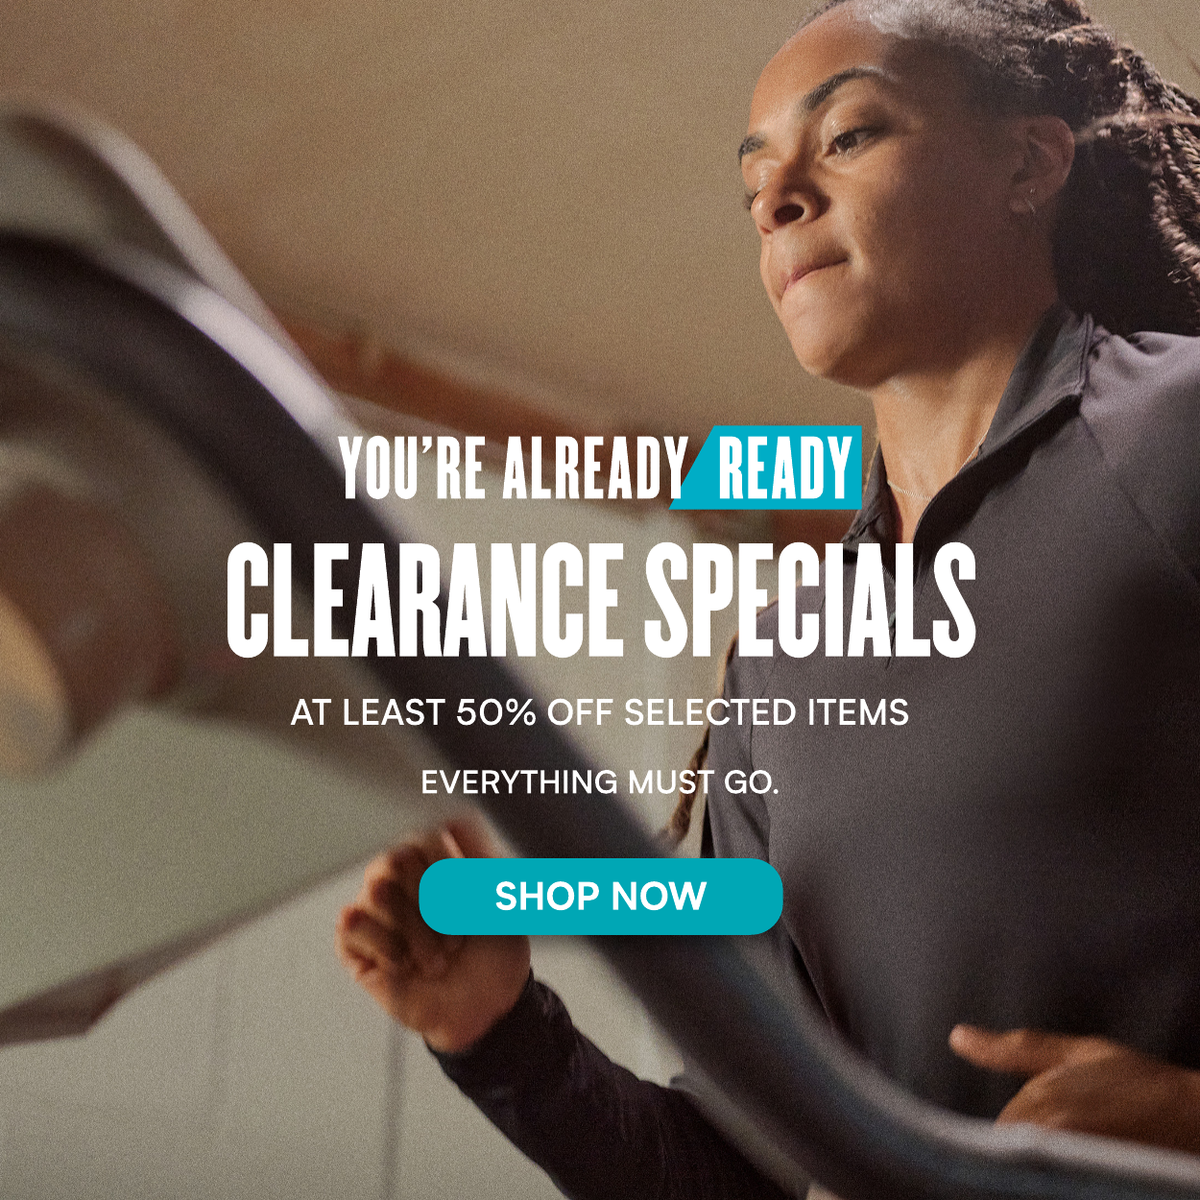 Clearance Specials | At least 50% off selected items